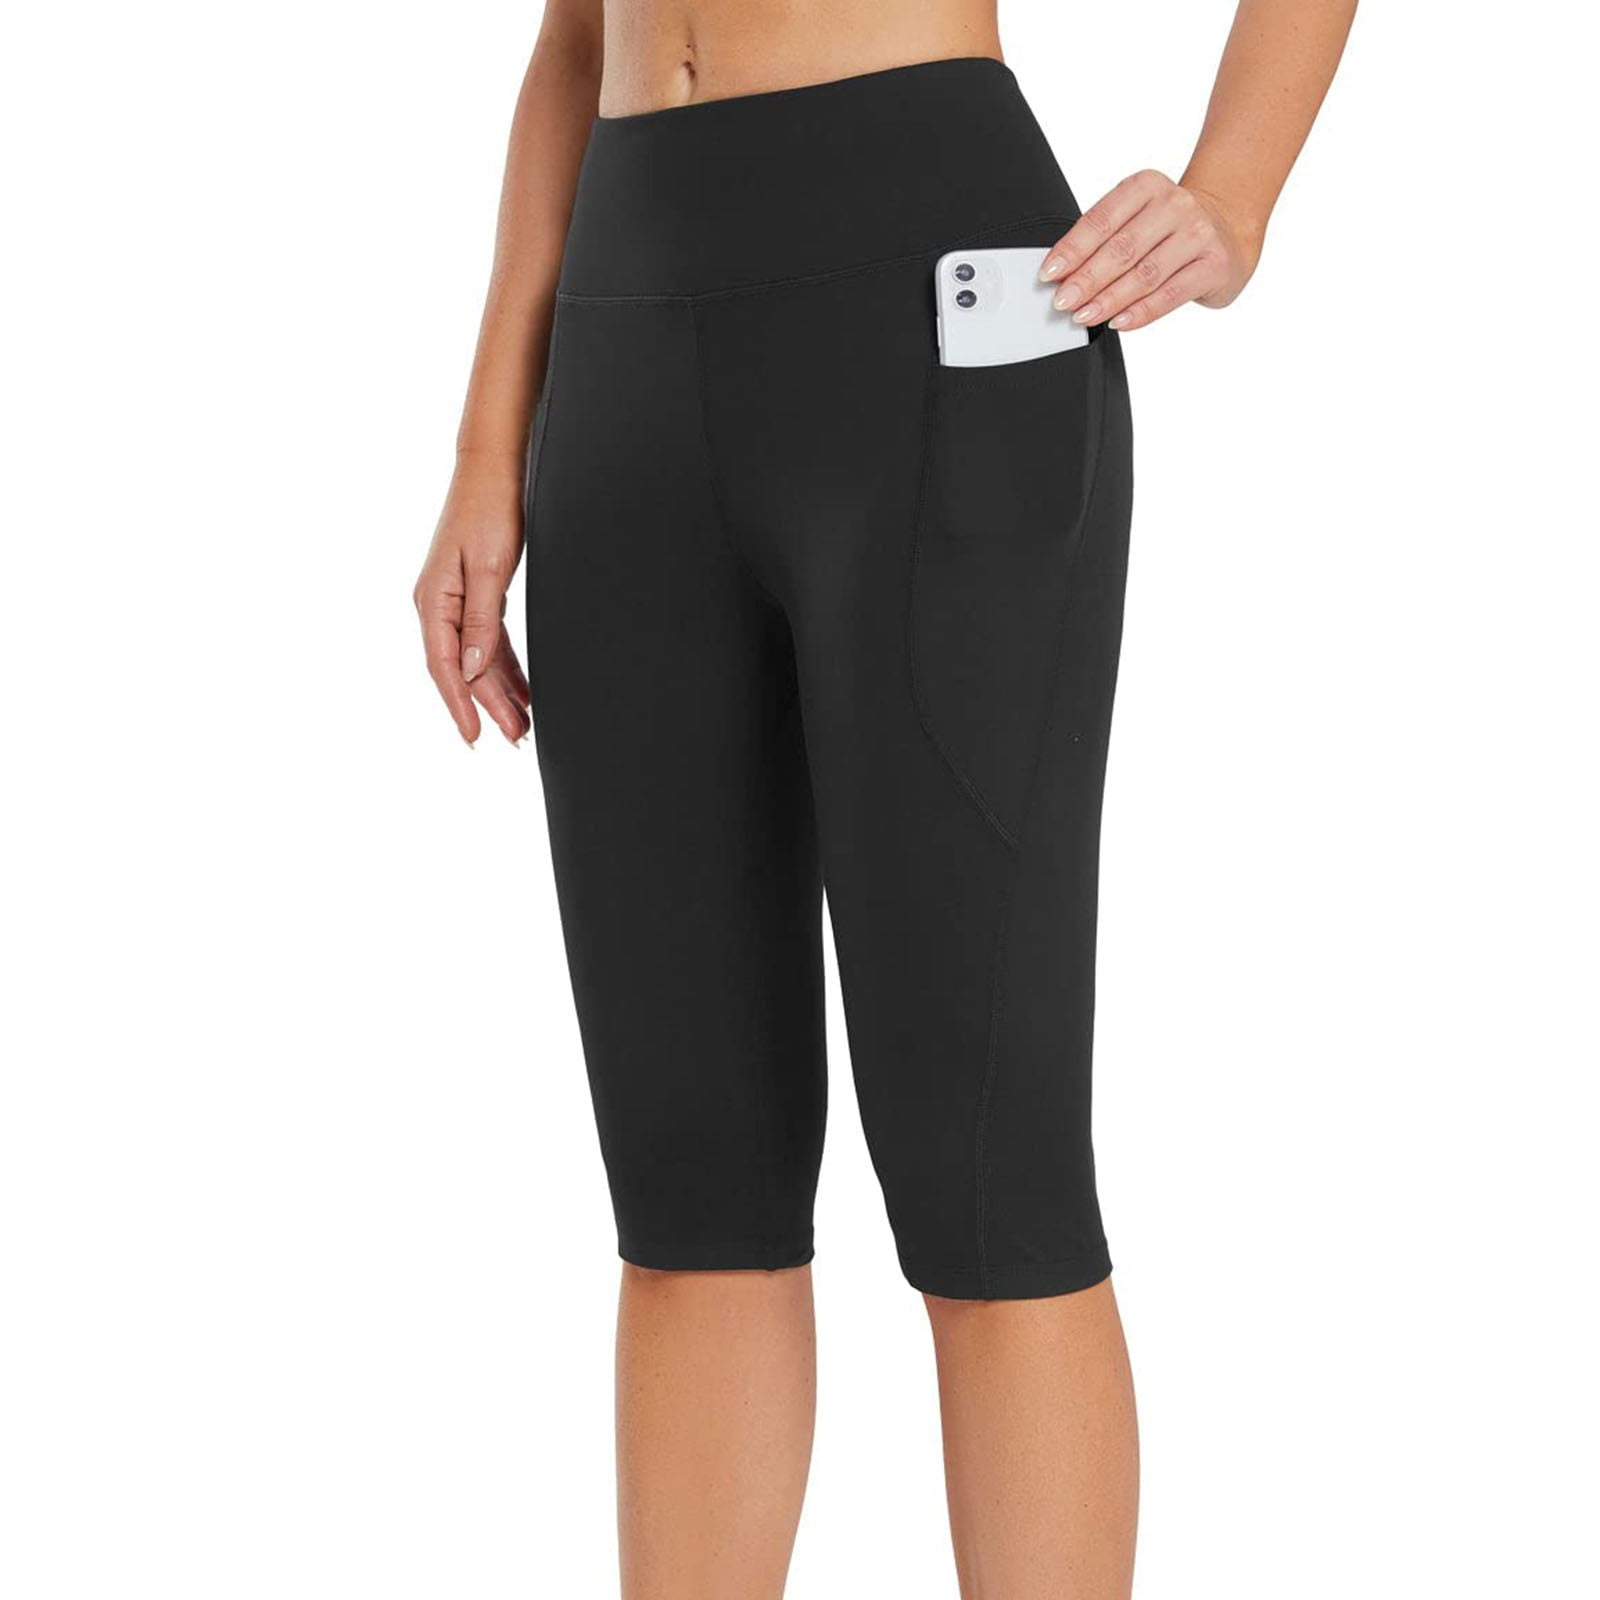 Discover more than 87 knee length exercise pants best - in.eteachers